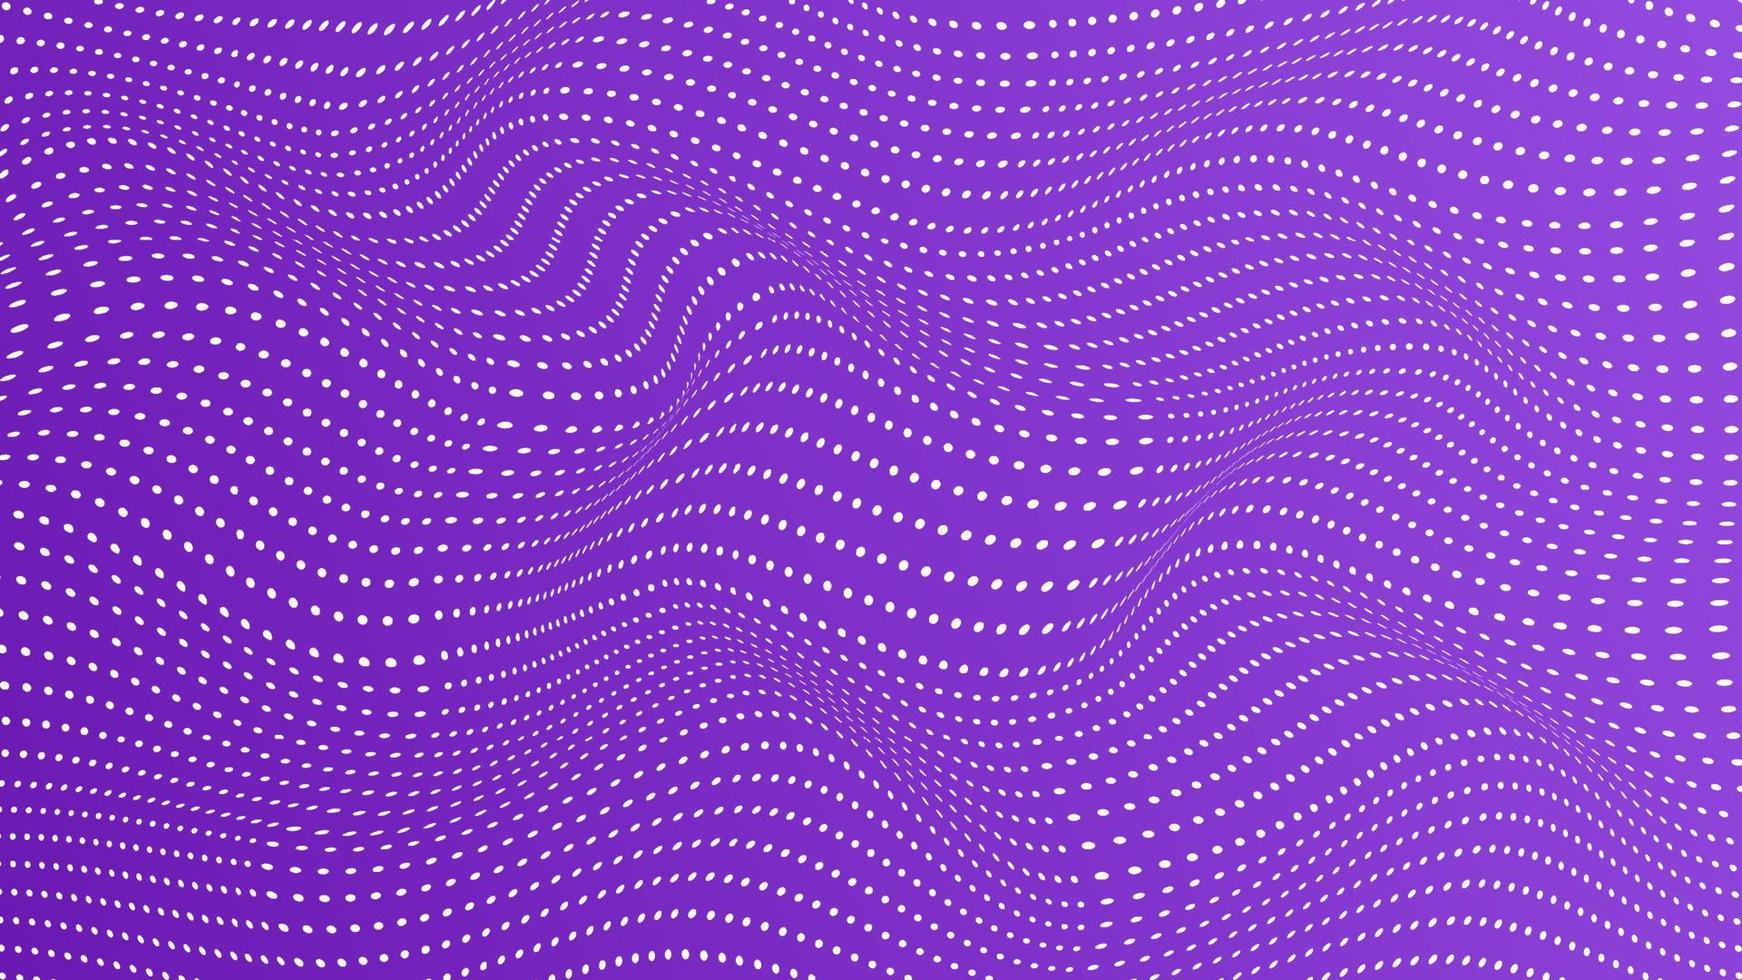 Purple background with modern wavy lines and halftone dots vector